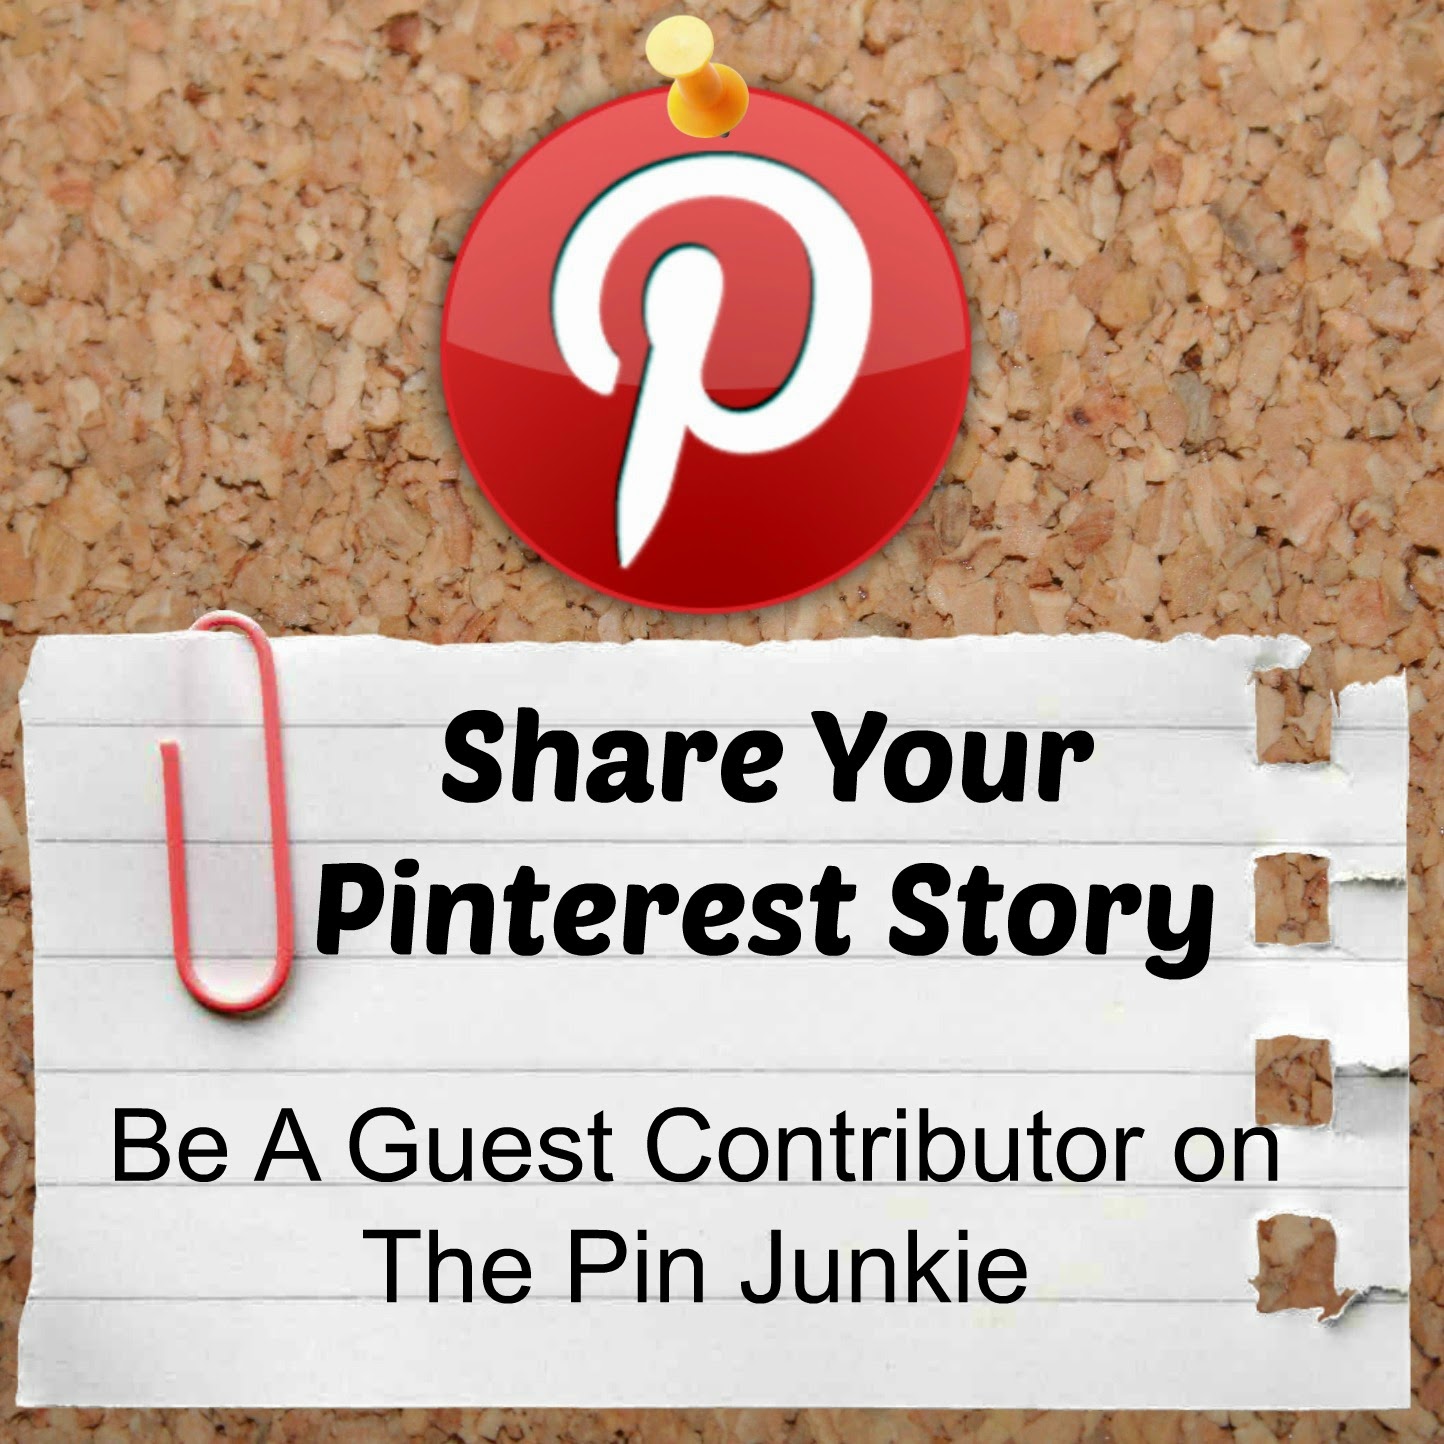 http://www.thepinjunkie.com/p/share-your-pinterest-story.html